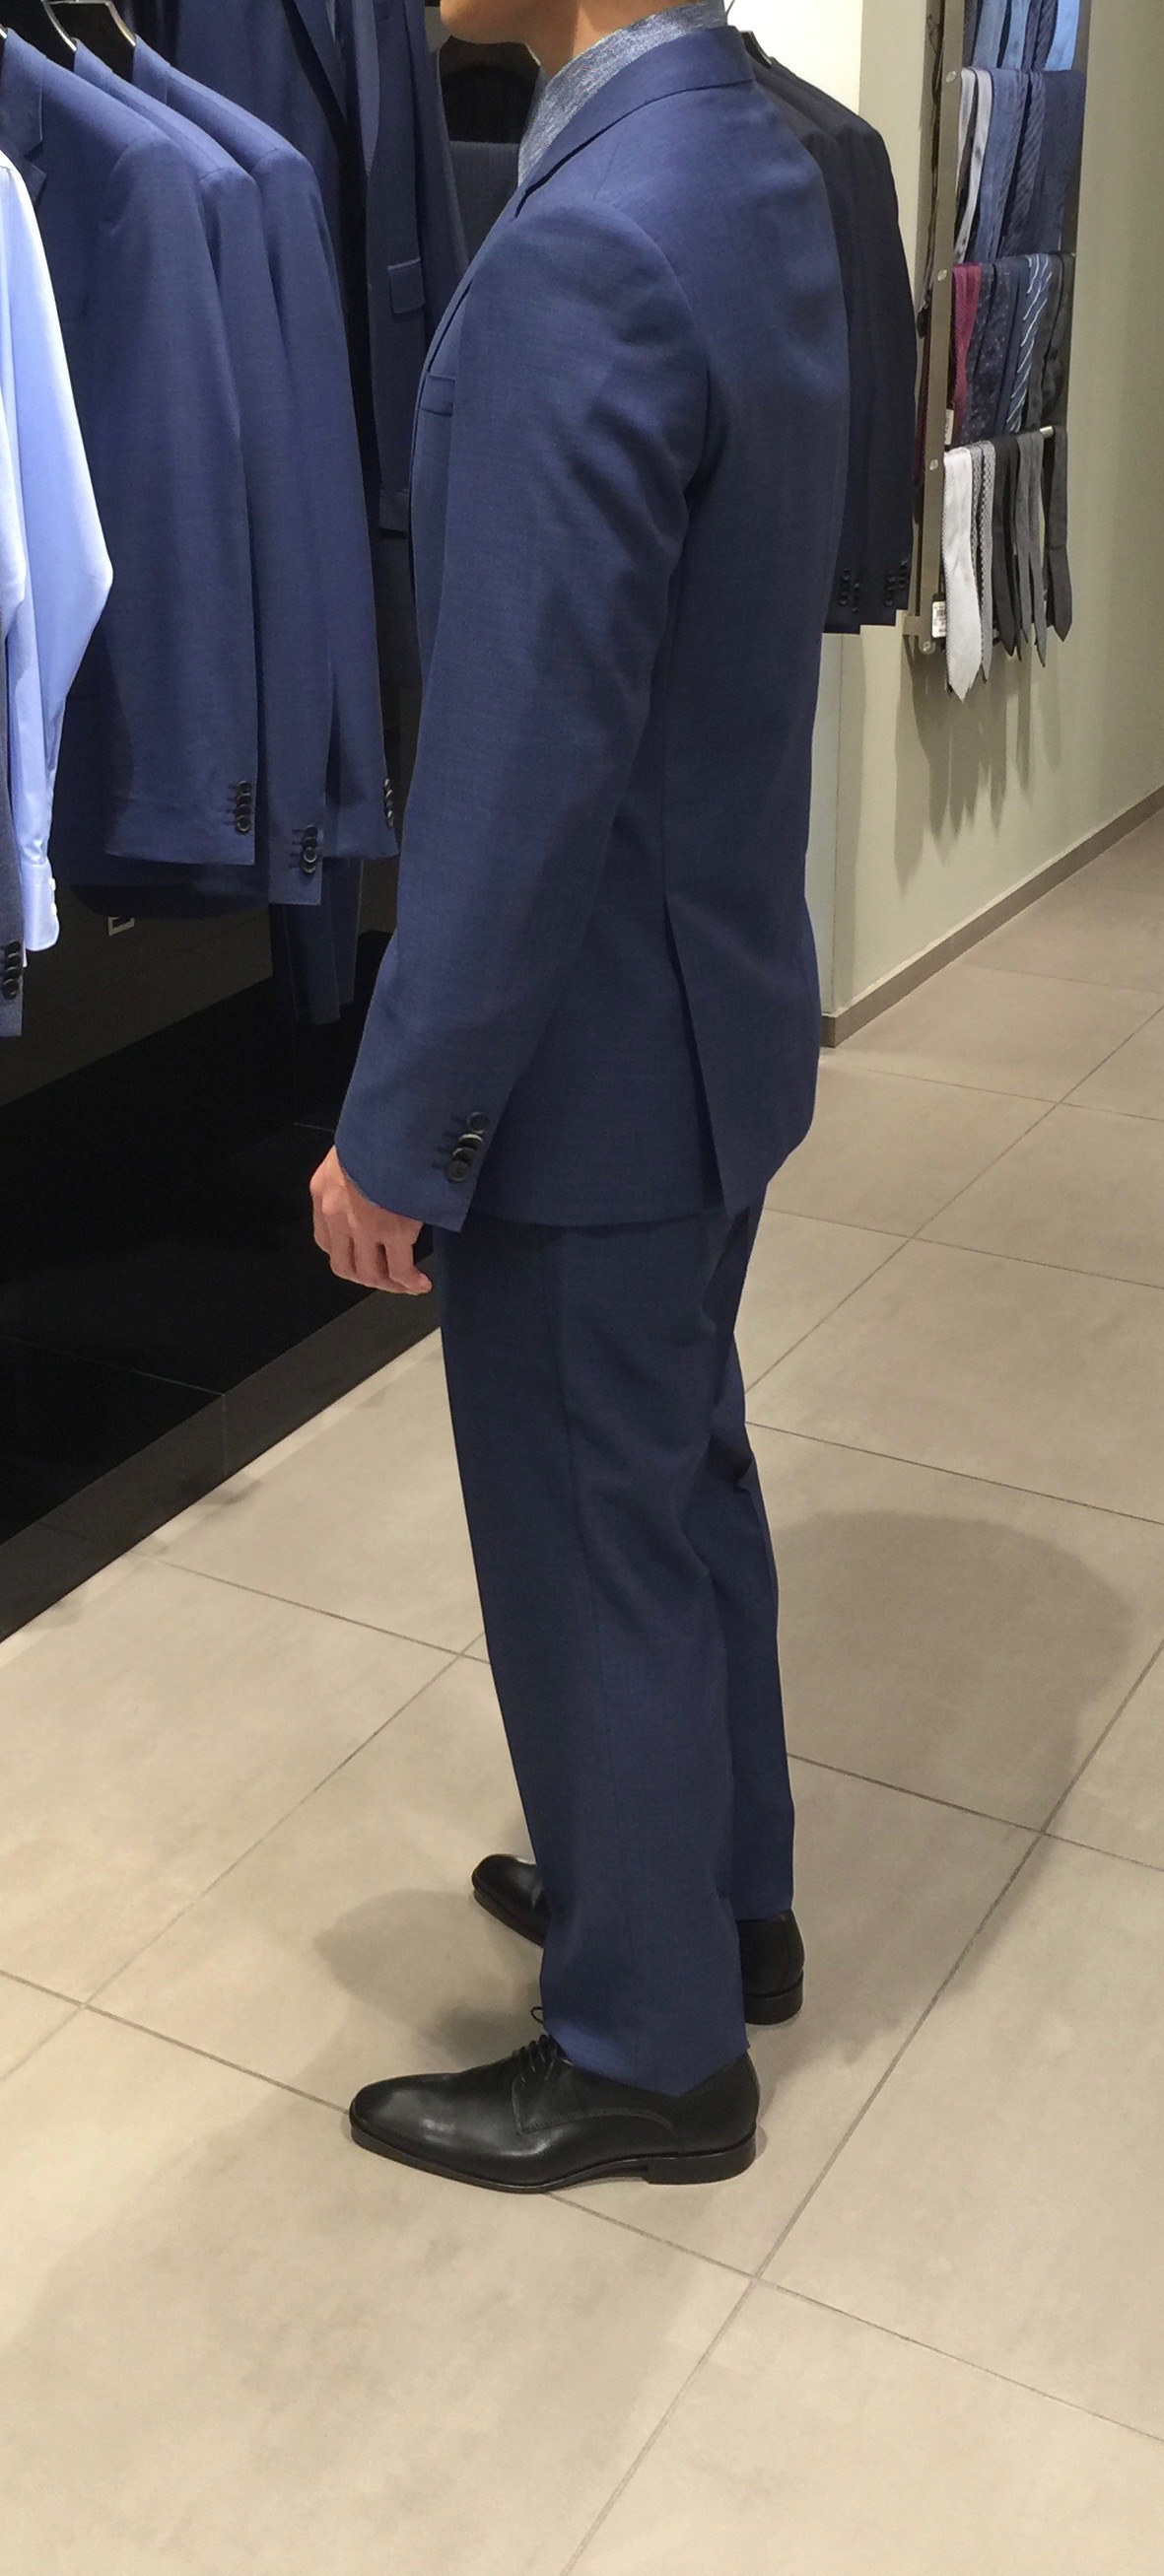 First Serious Suit / Sizing and Fit | Styleforum